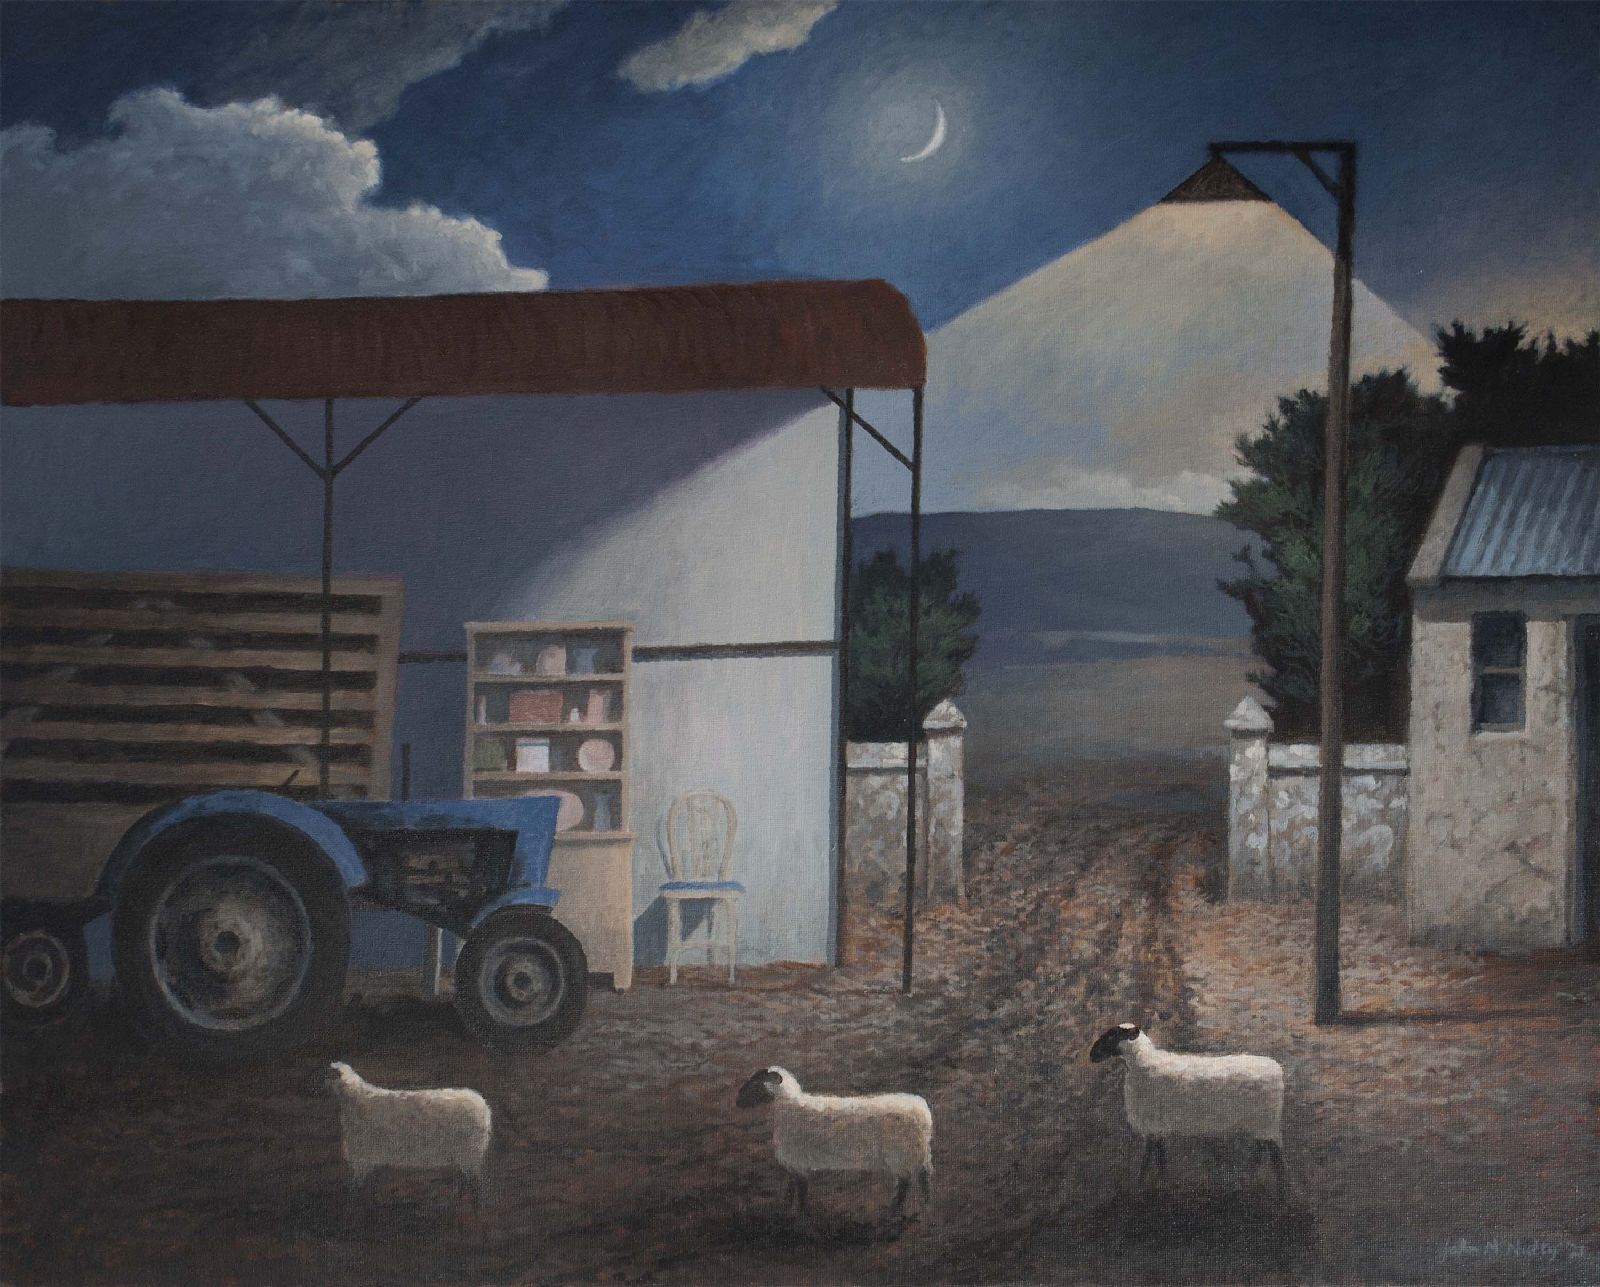 New moon with sheep by John  McNulty 